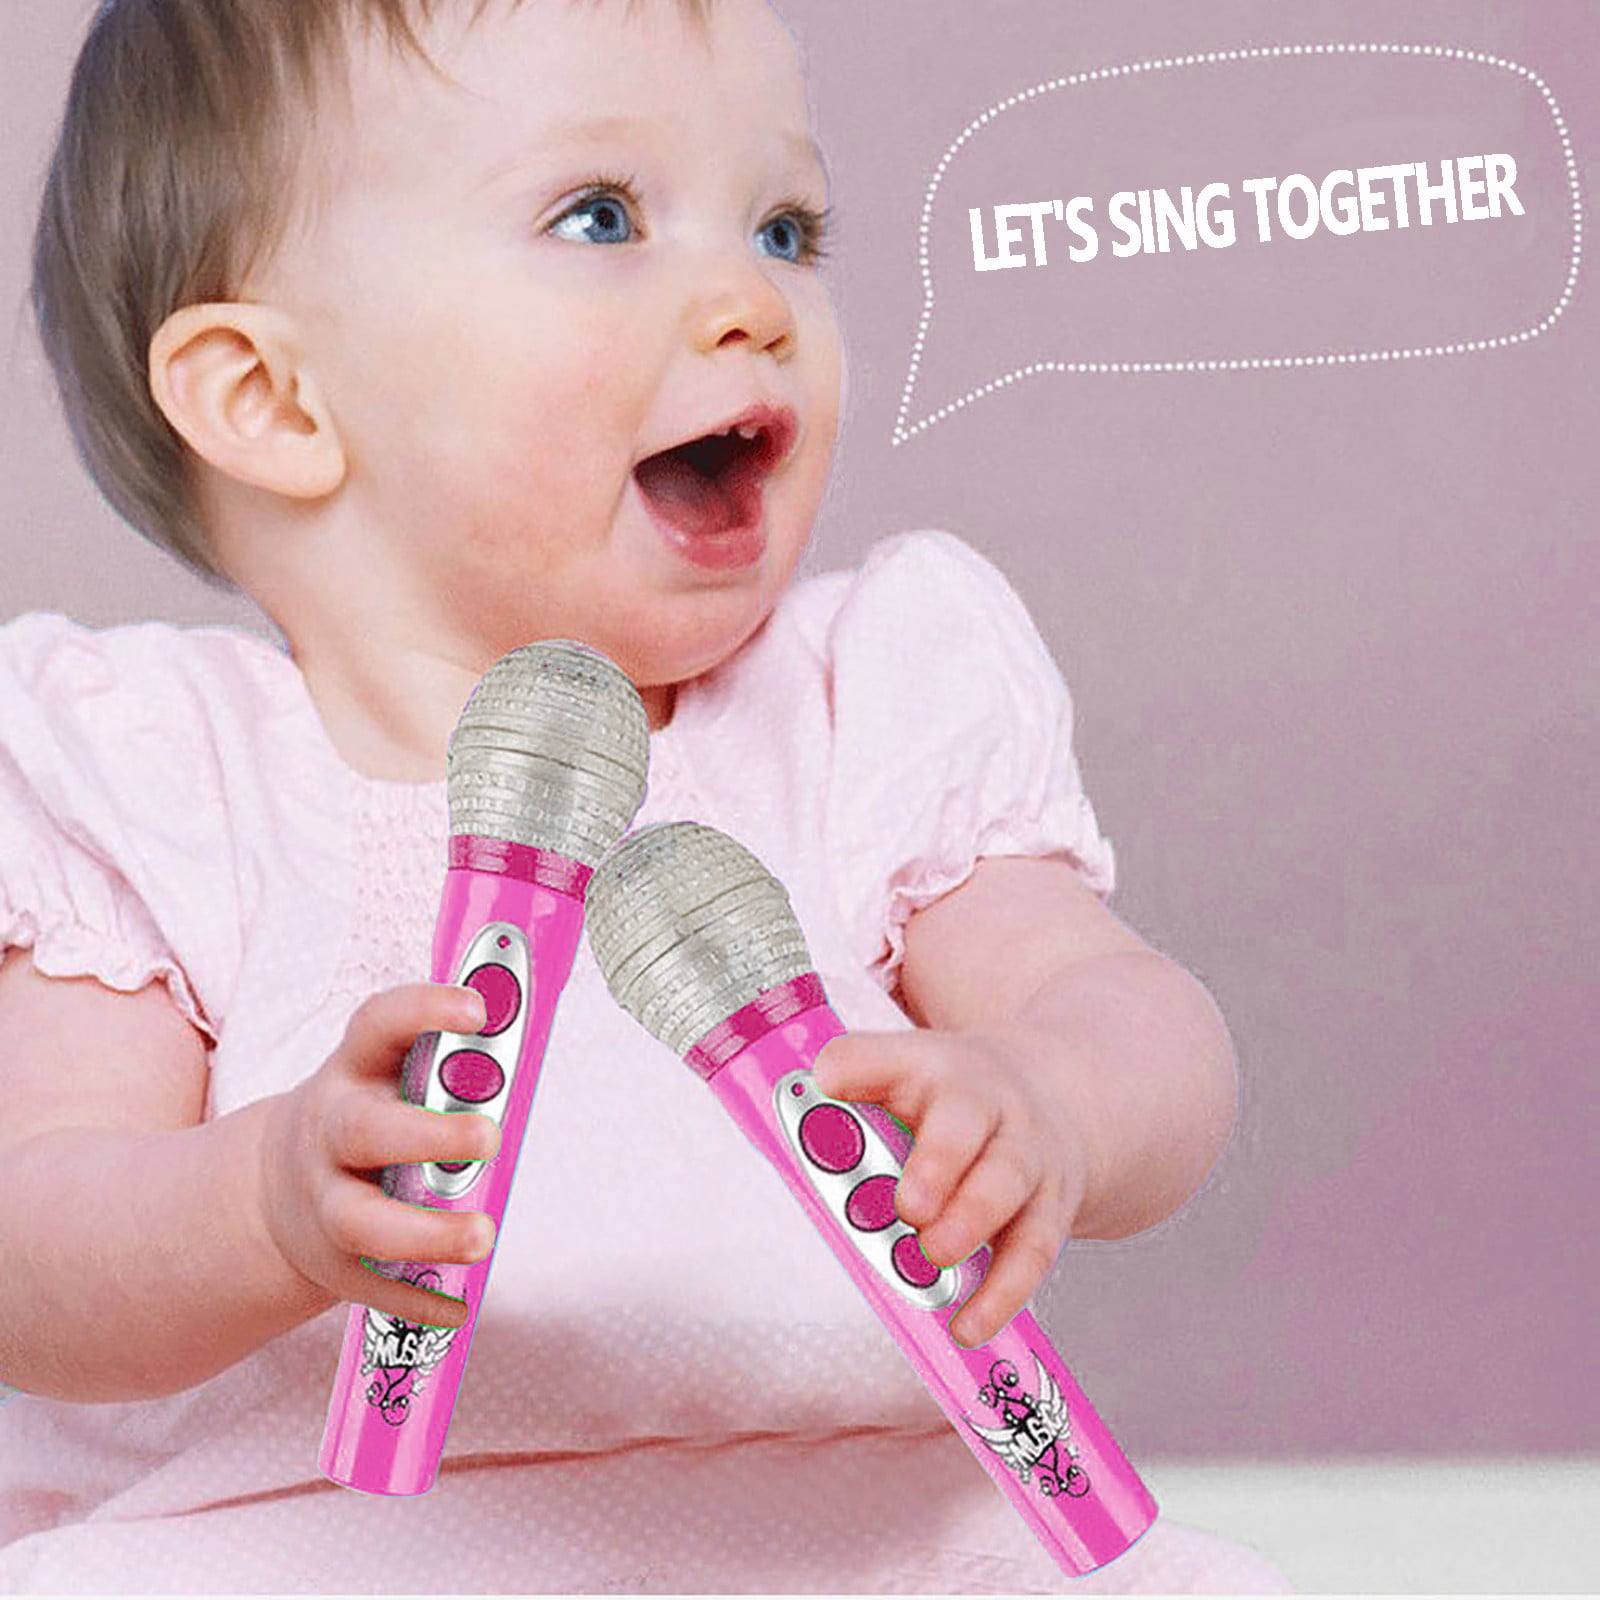 New Kids Karaoke Machine With 2 Microphones Music Play Toys Set Adjustable Stand 